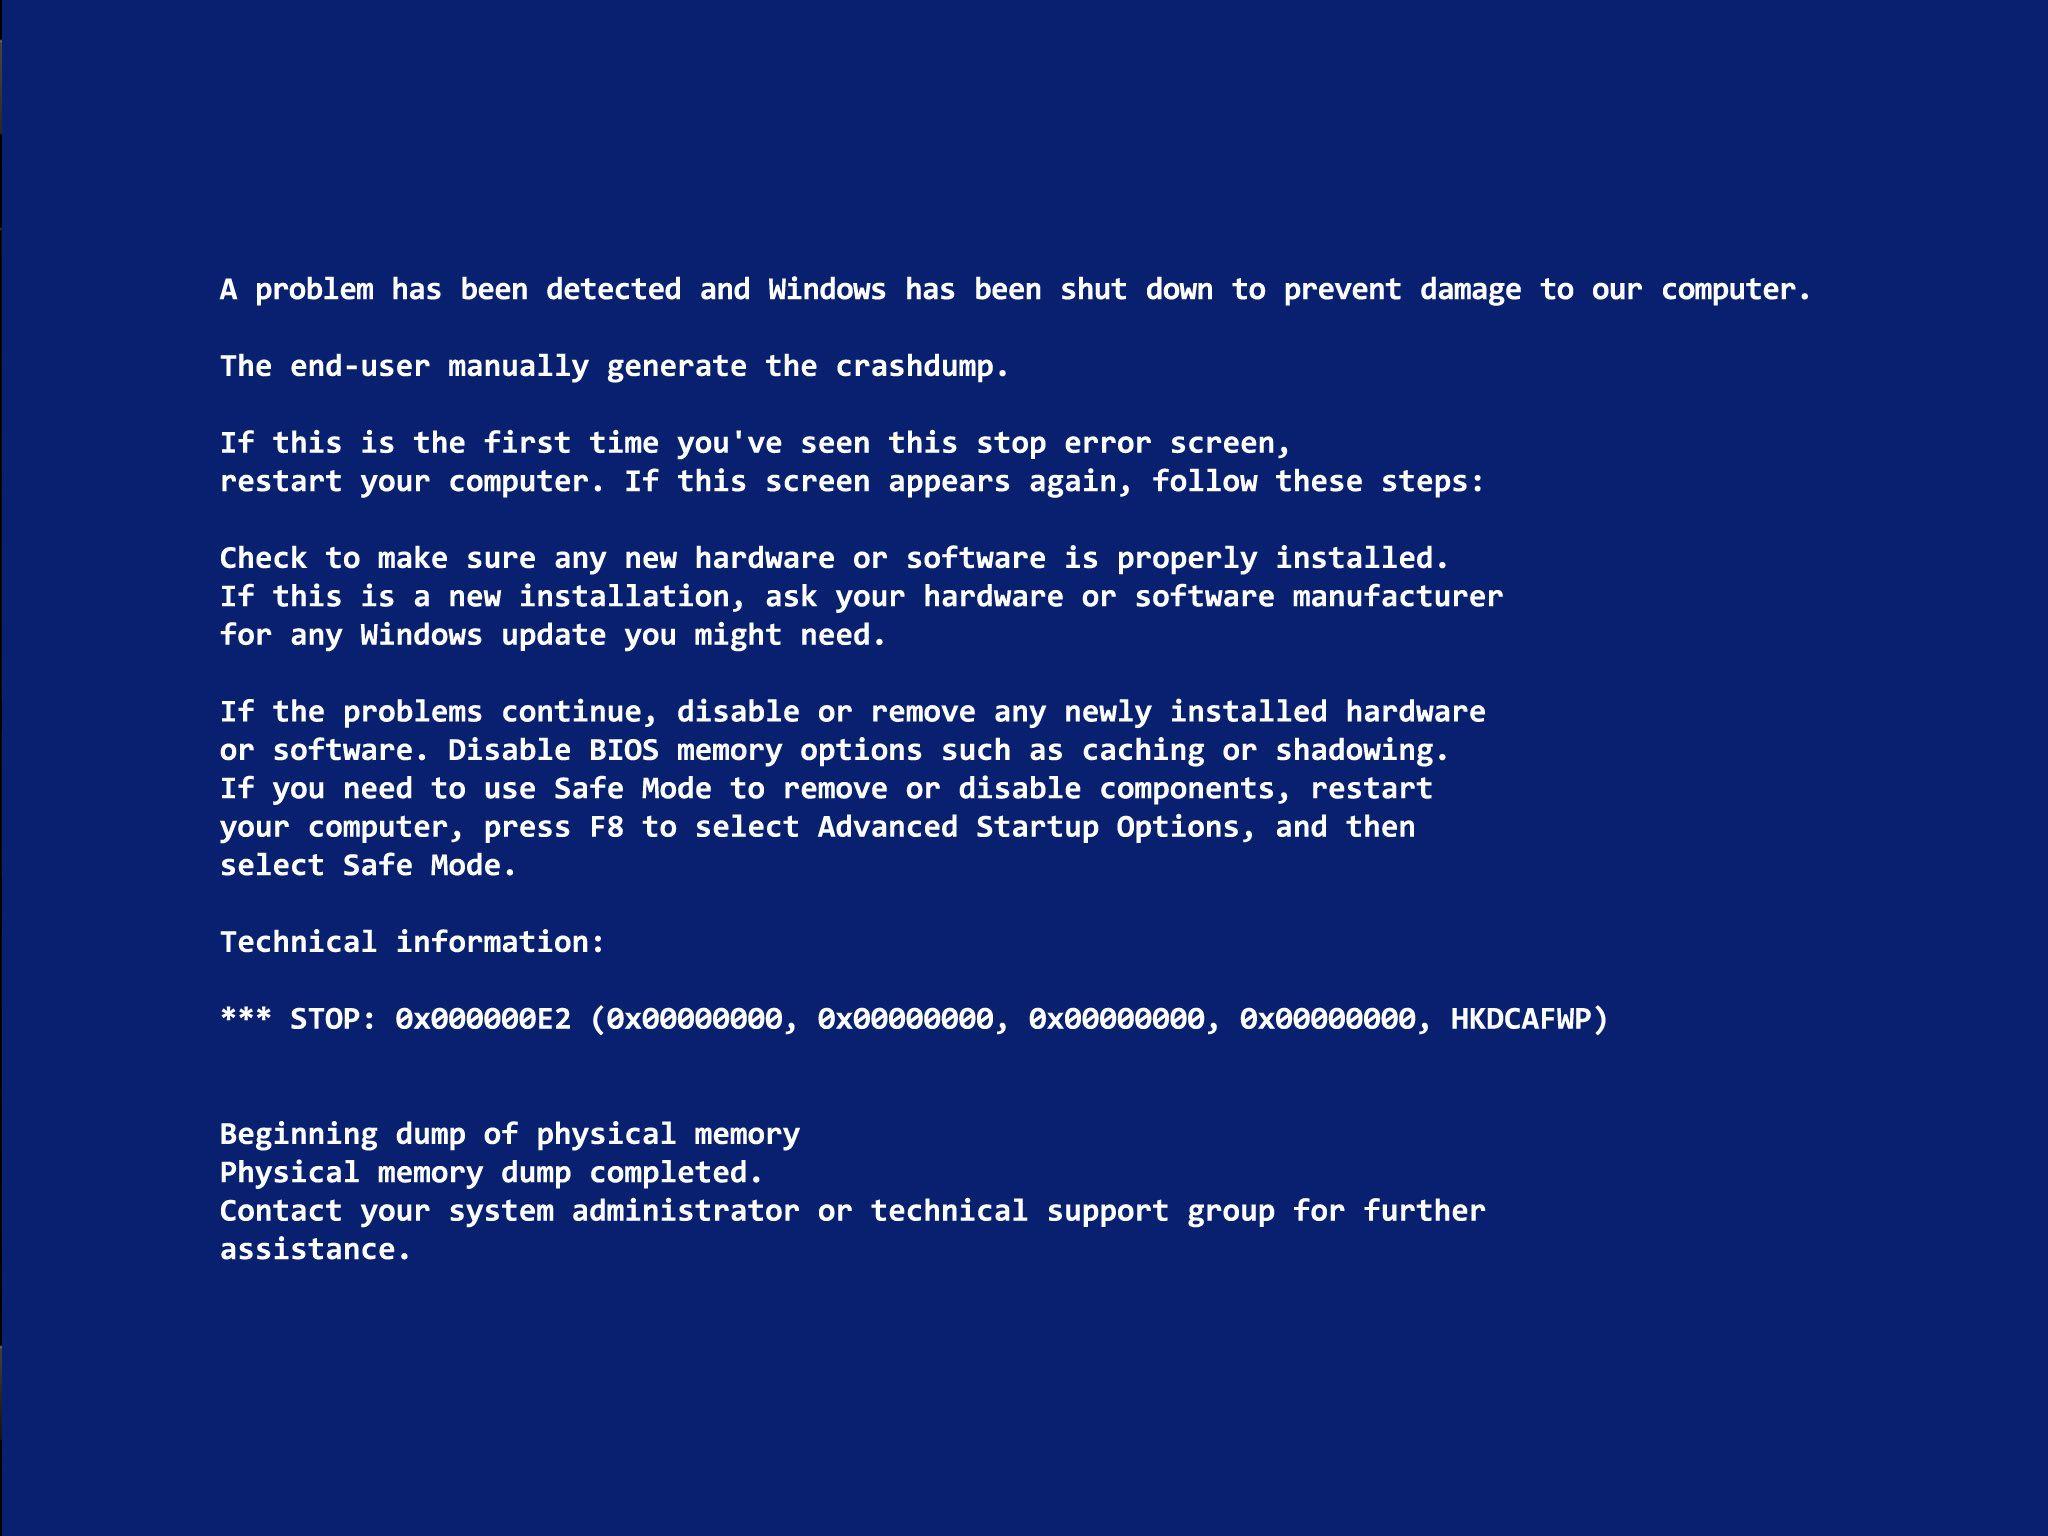 Blue Screen of Death Wallpaper for April Fool's Day